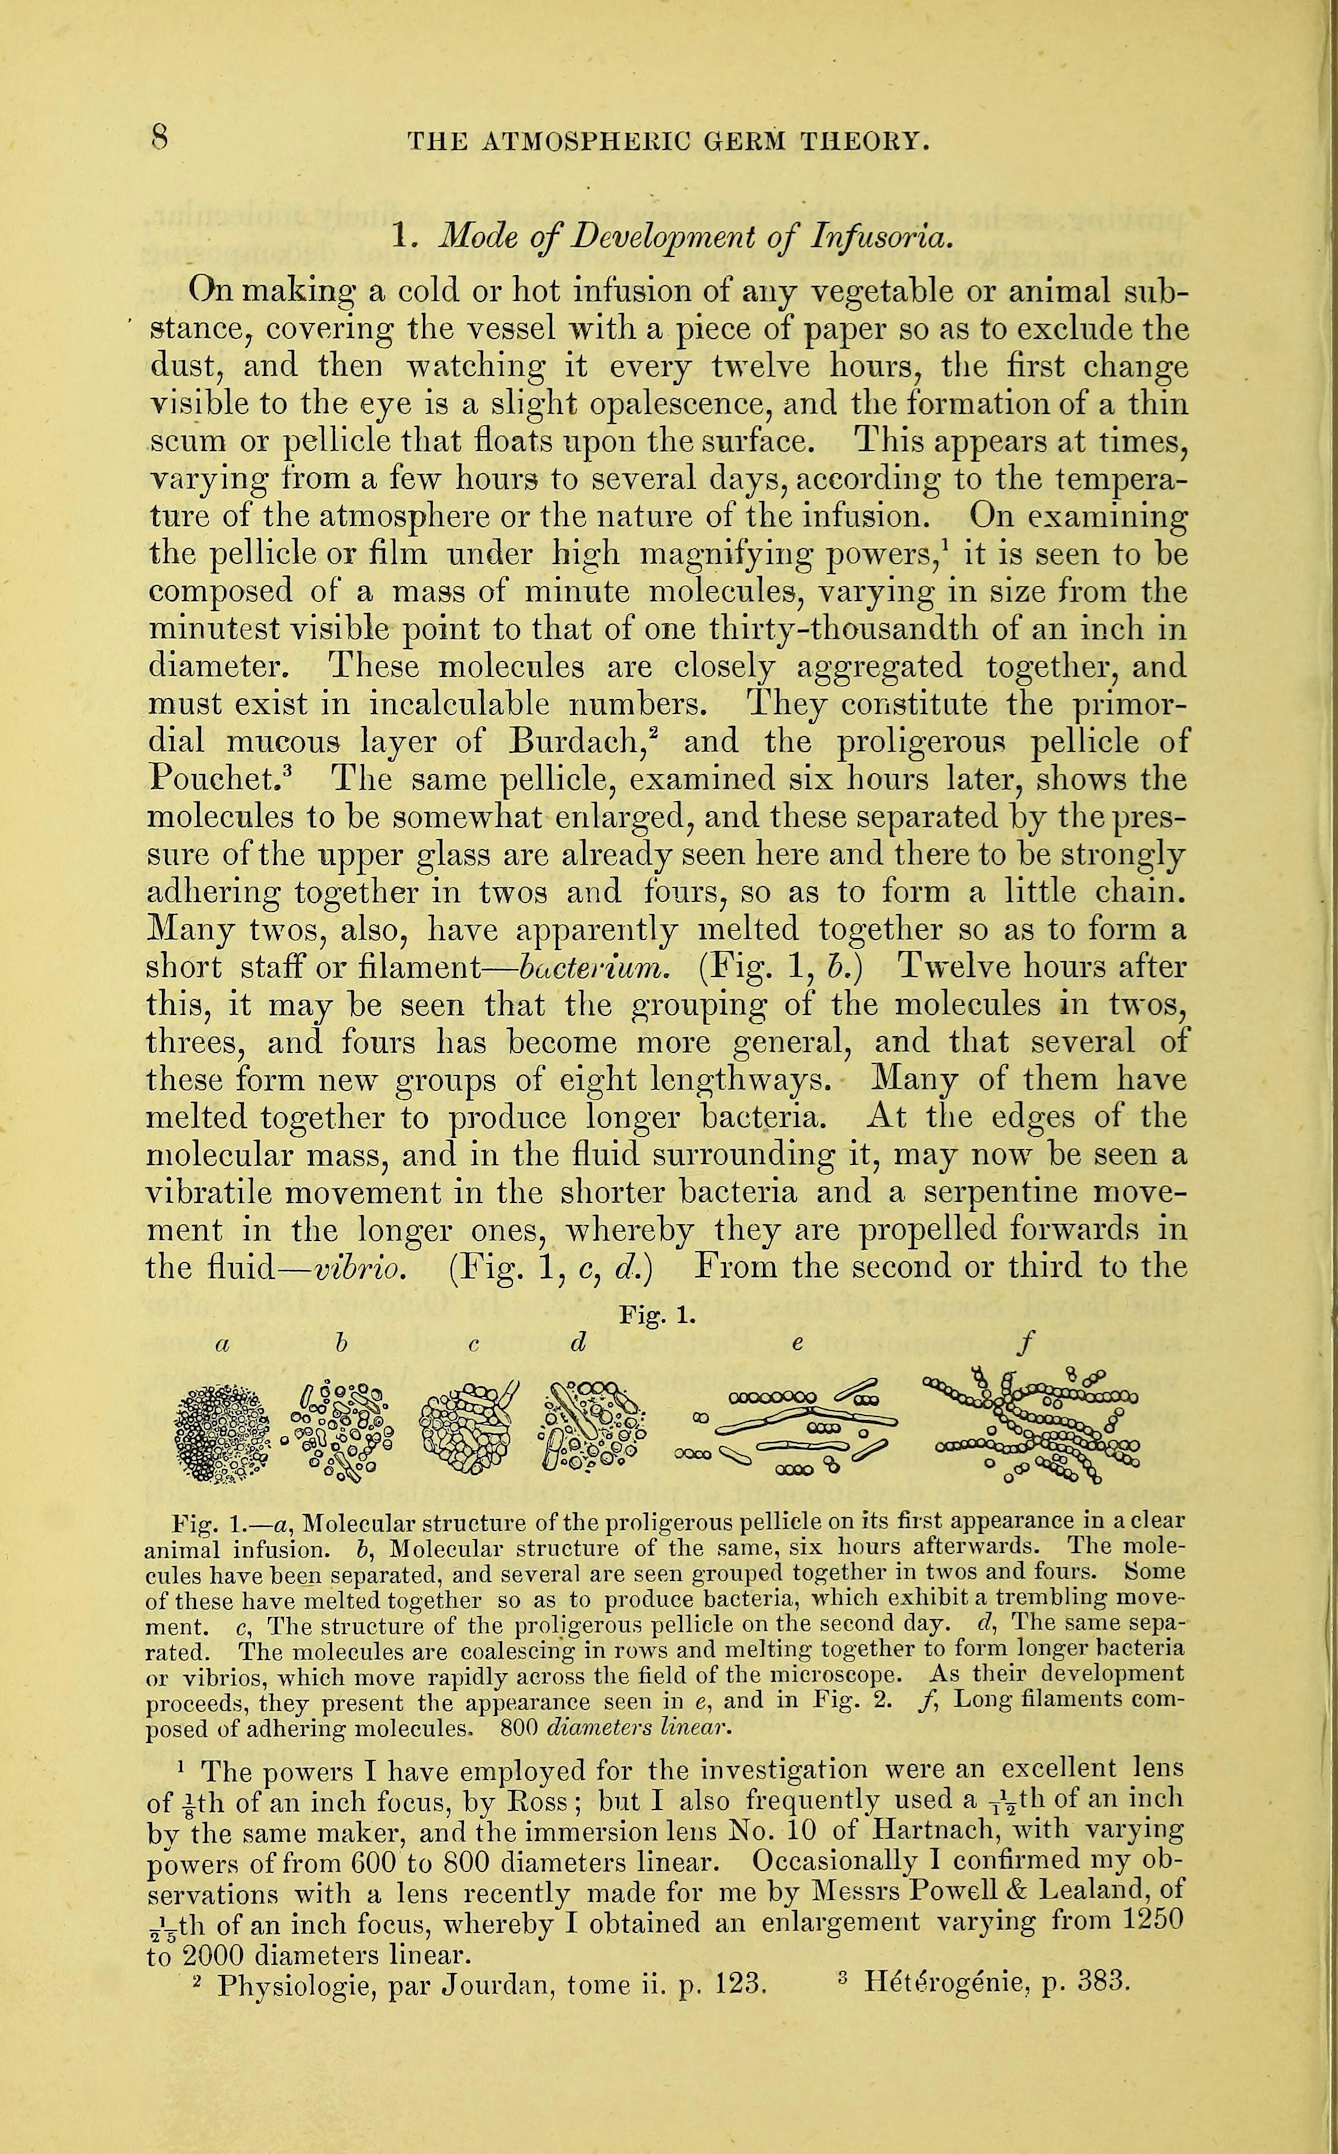 Figure 1 from On the atmospheric germ theory and origin of infusoria : a lecture delivered to the Royal College of Surgeons of Edinburgh, 17th January 1868.